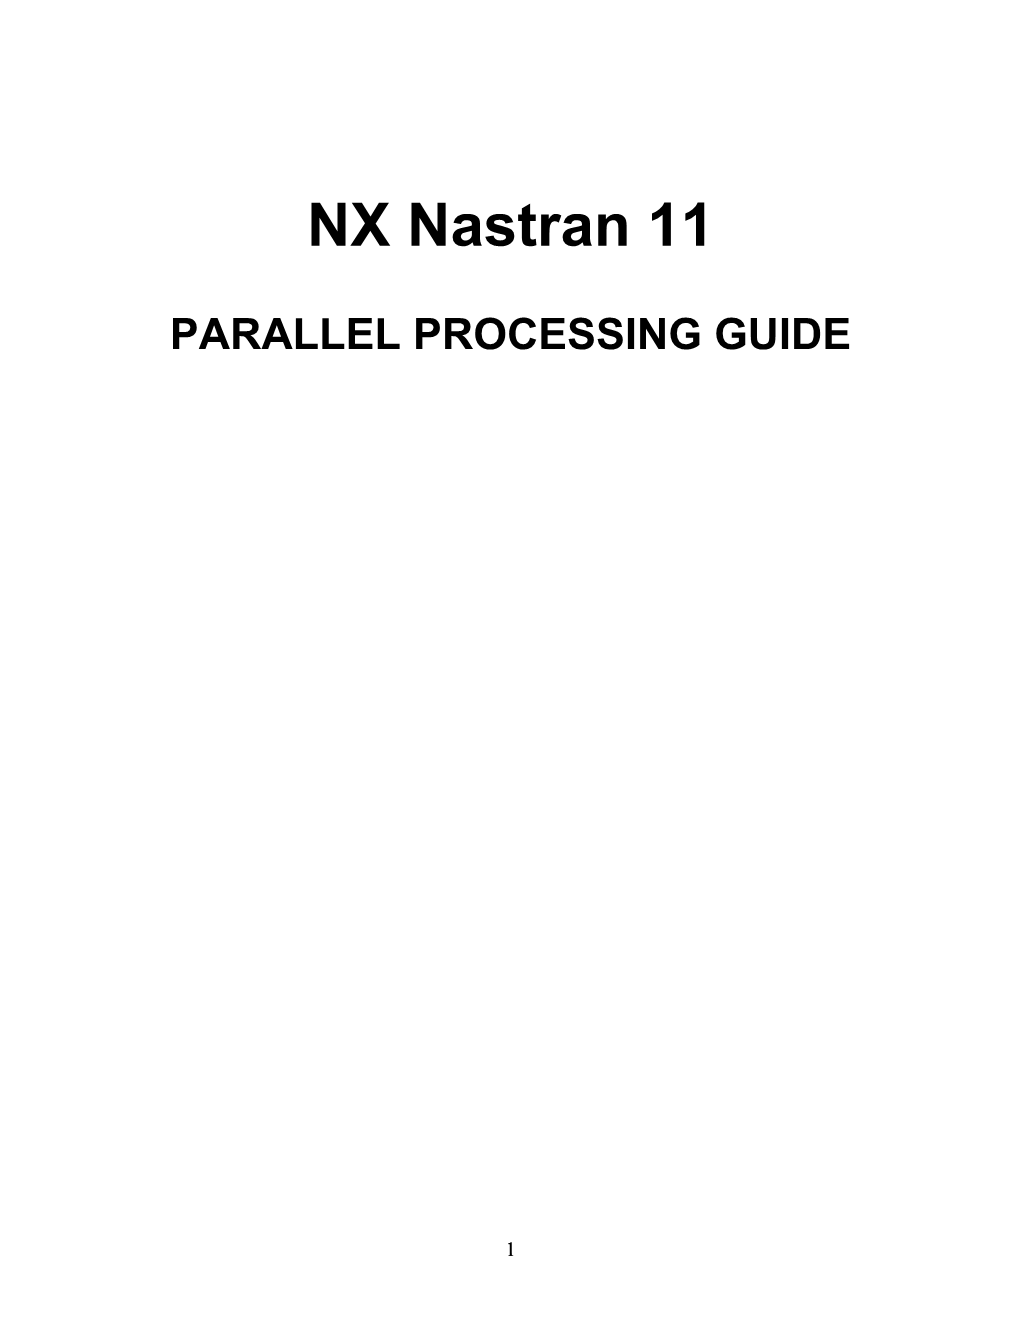 Parallel Processing User's Guide